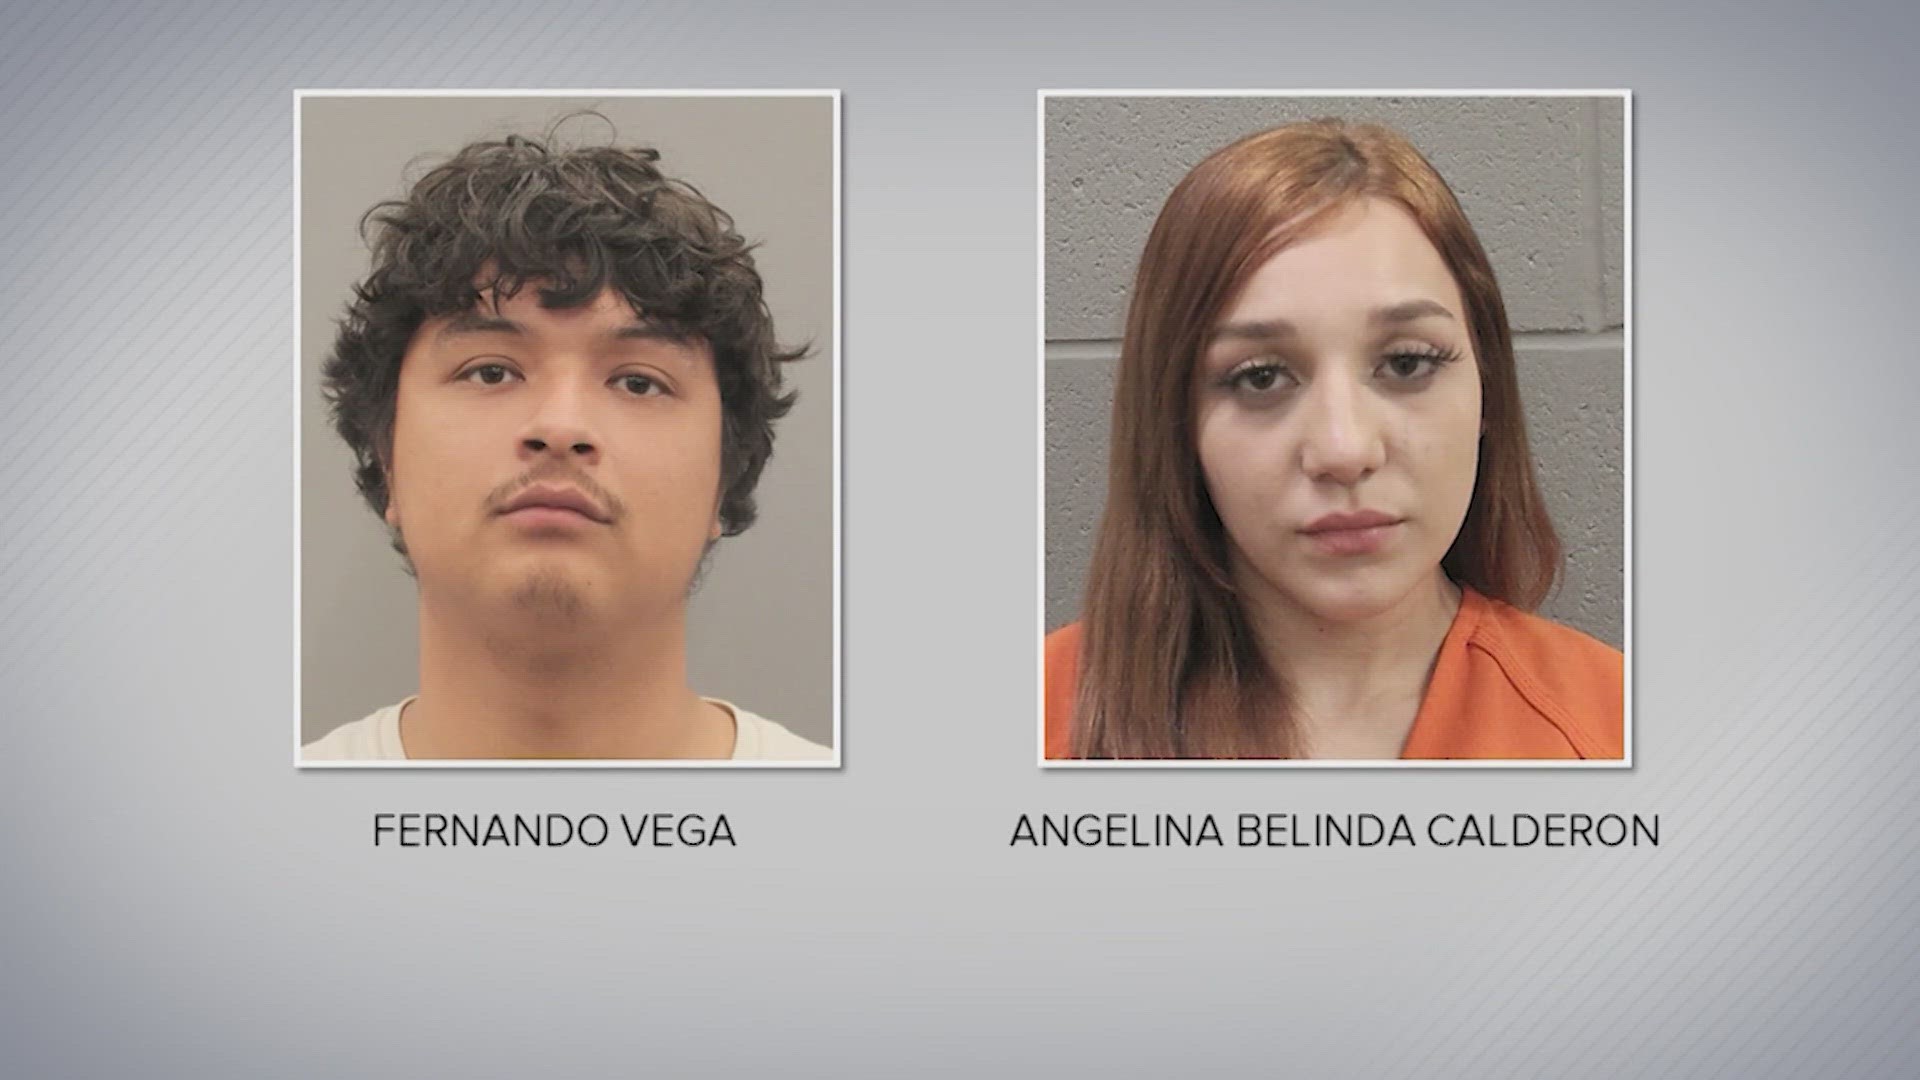 Initially, police said there were no visible signs of trauma. An autopsy later determined the twins' had suffered blunt force trauma, HPD said.